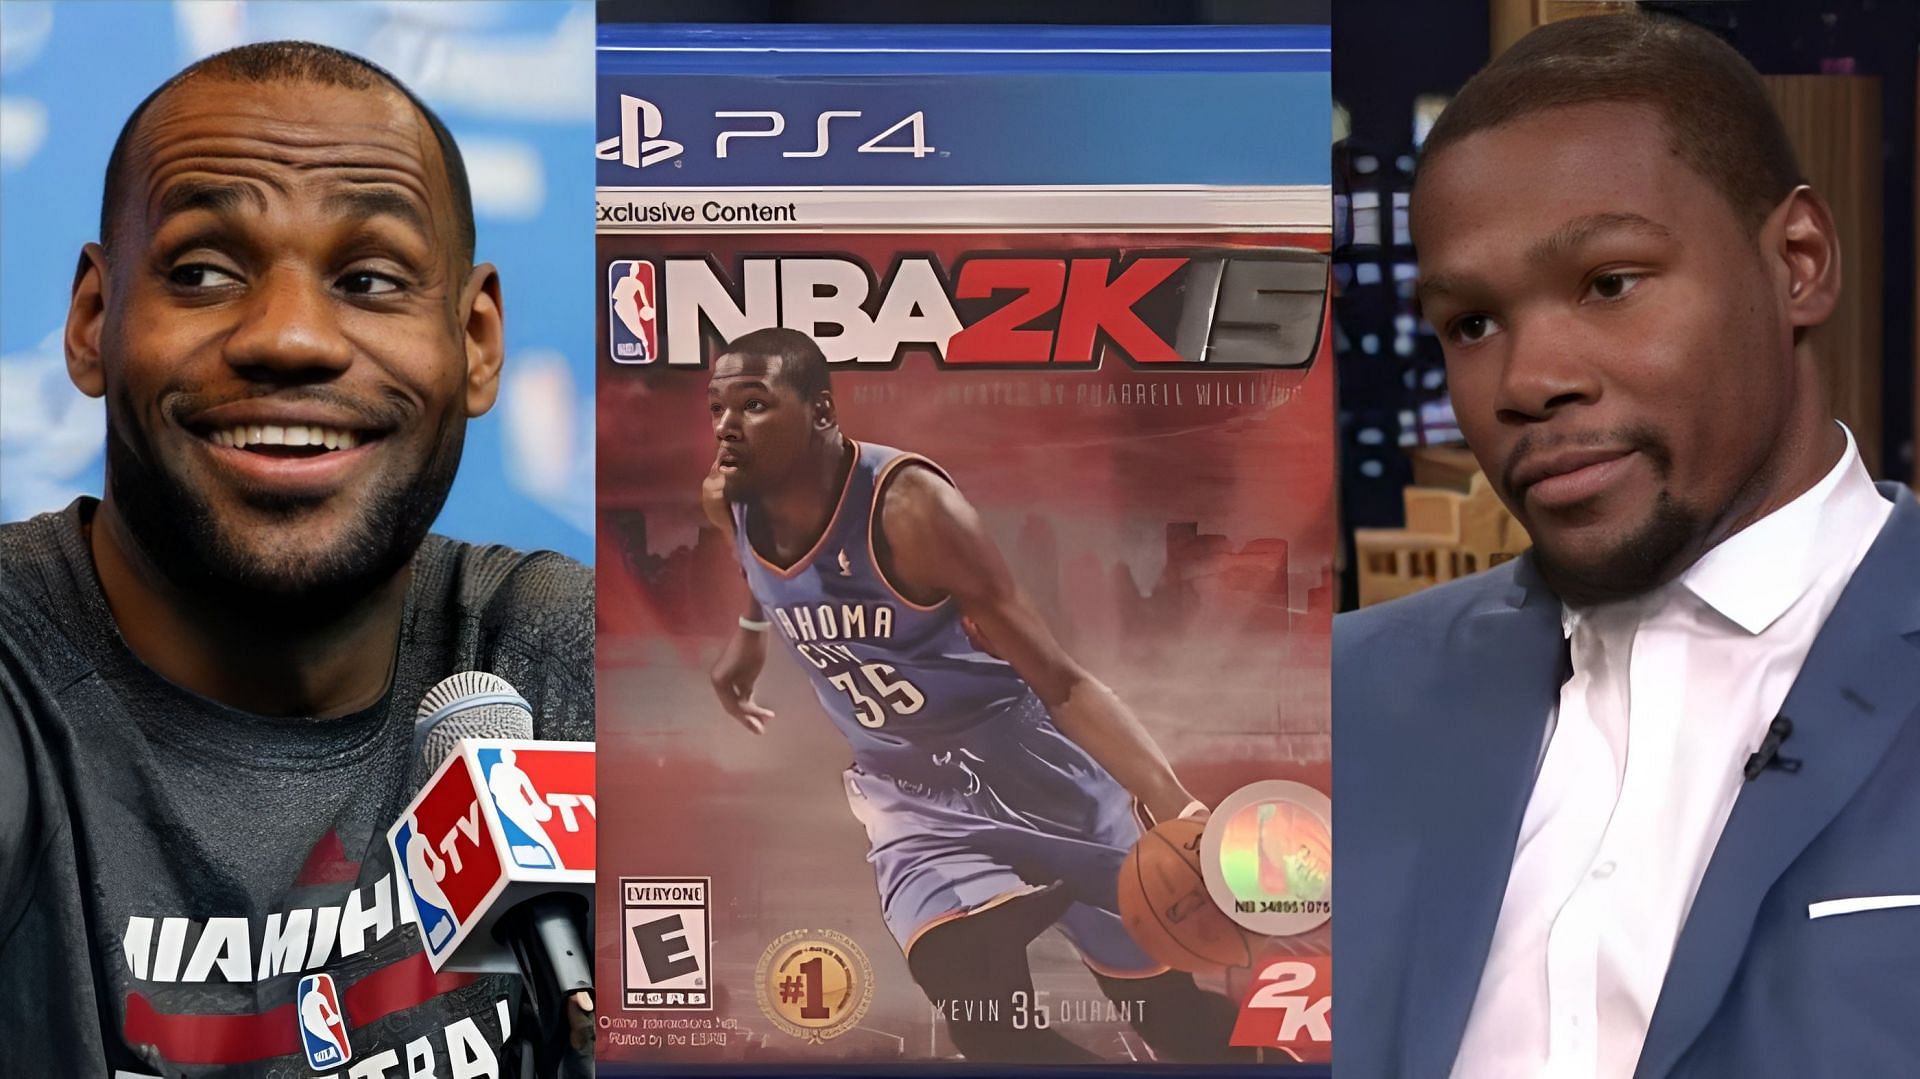 Kevin Durant once had an embarrassing moment, revealing he played as LeBron James in NBA 2K15